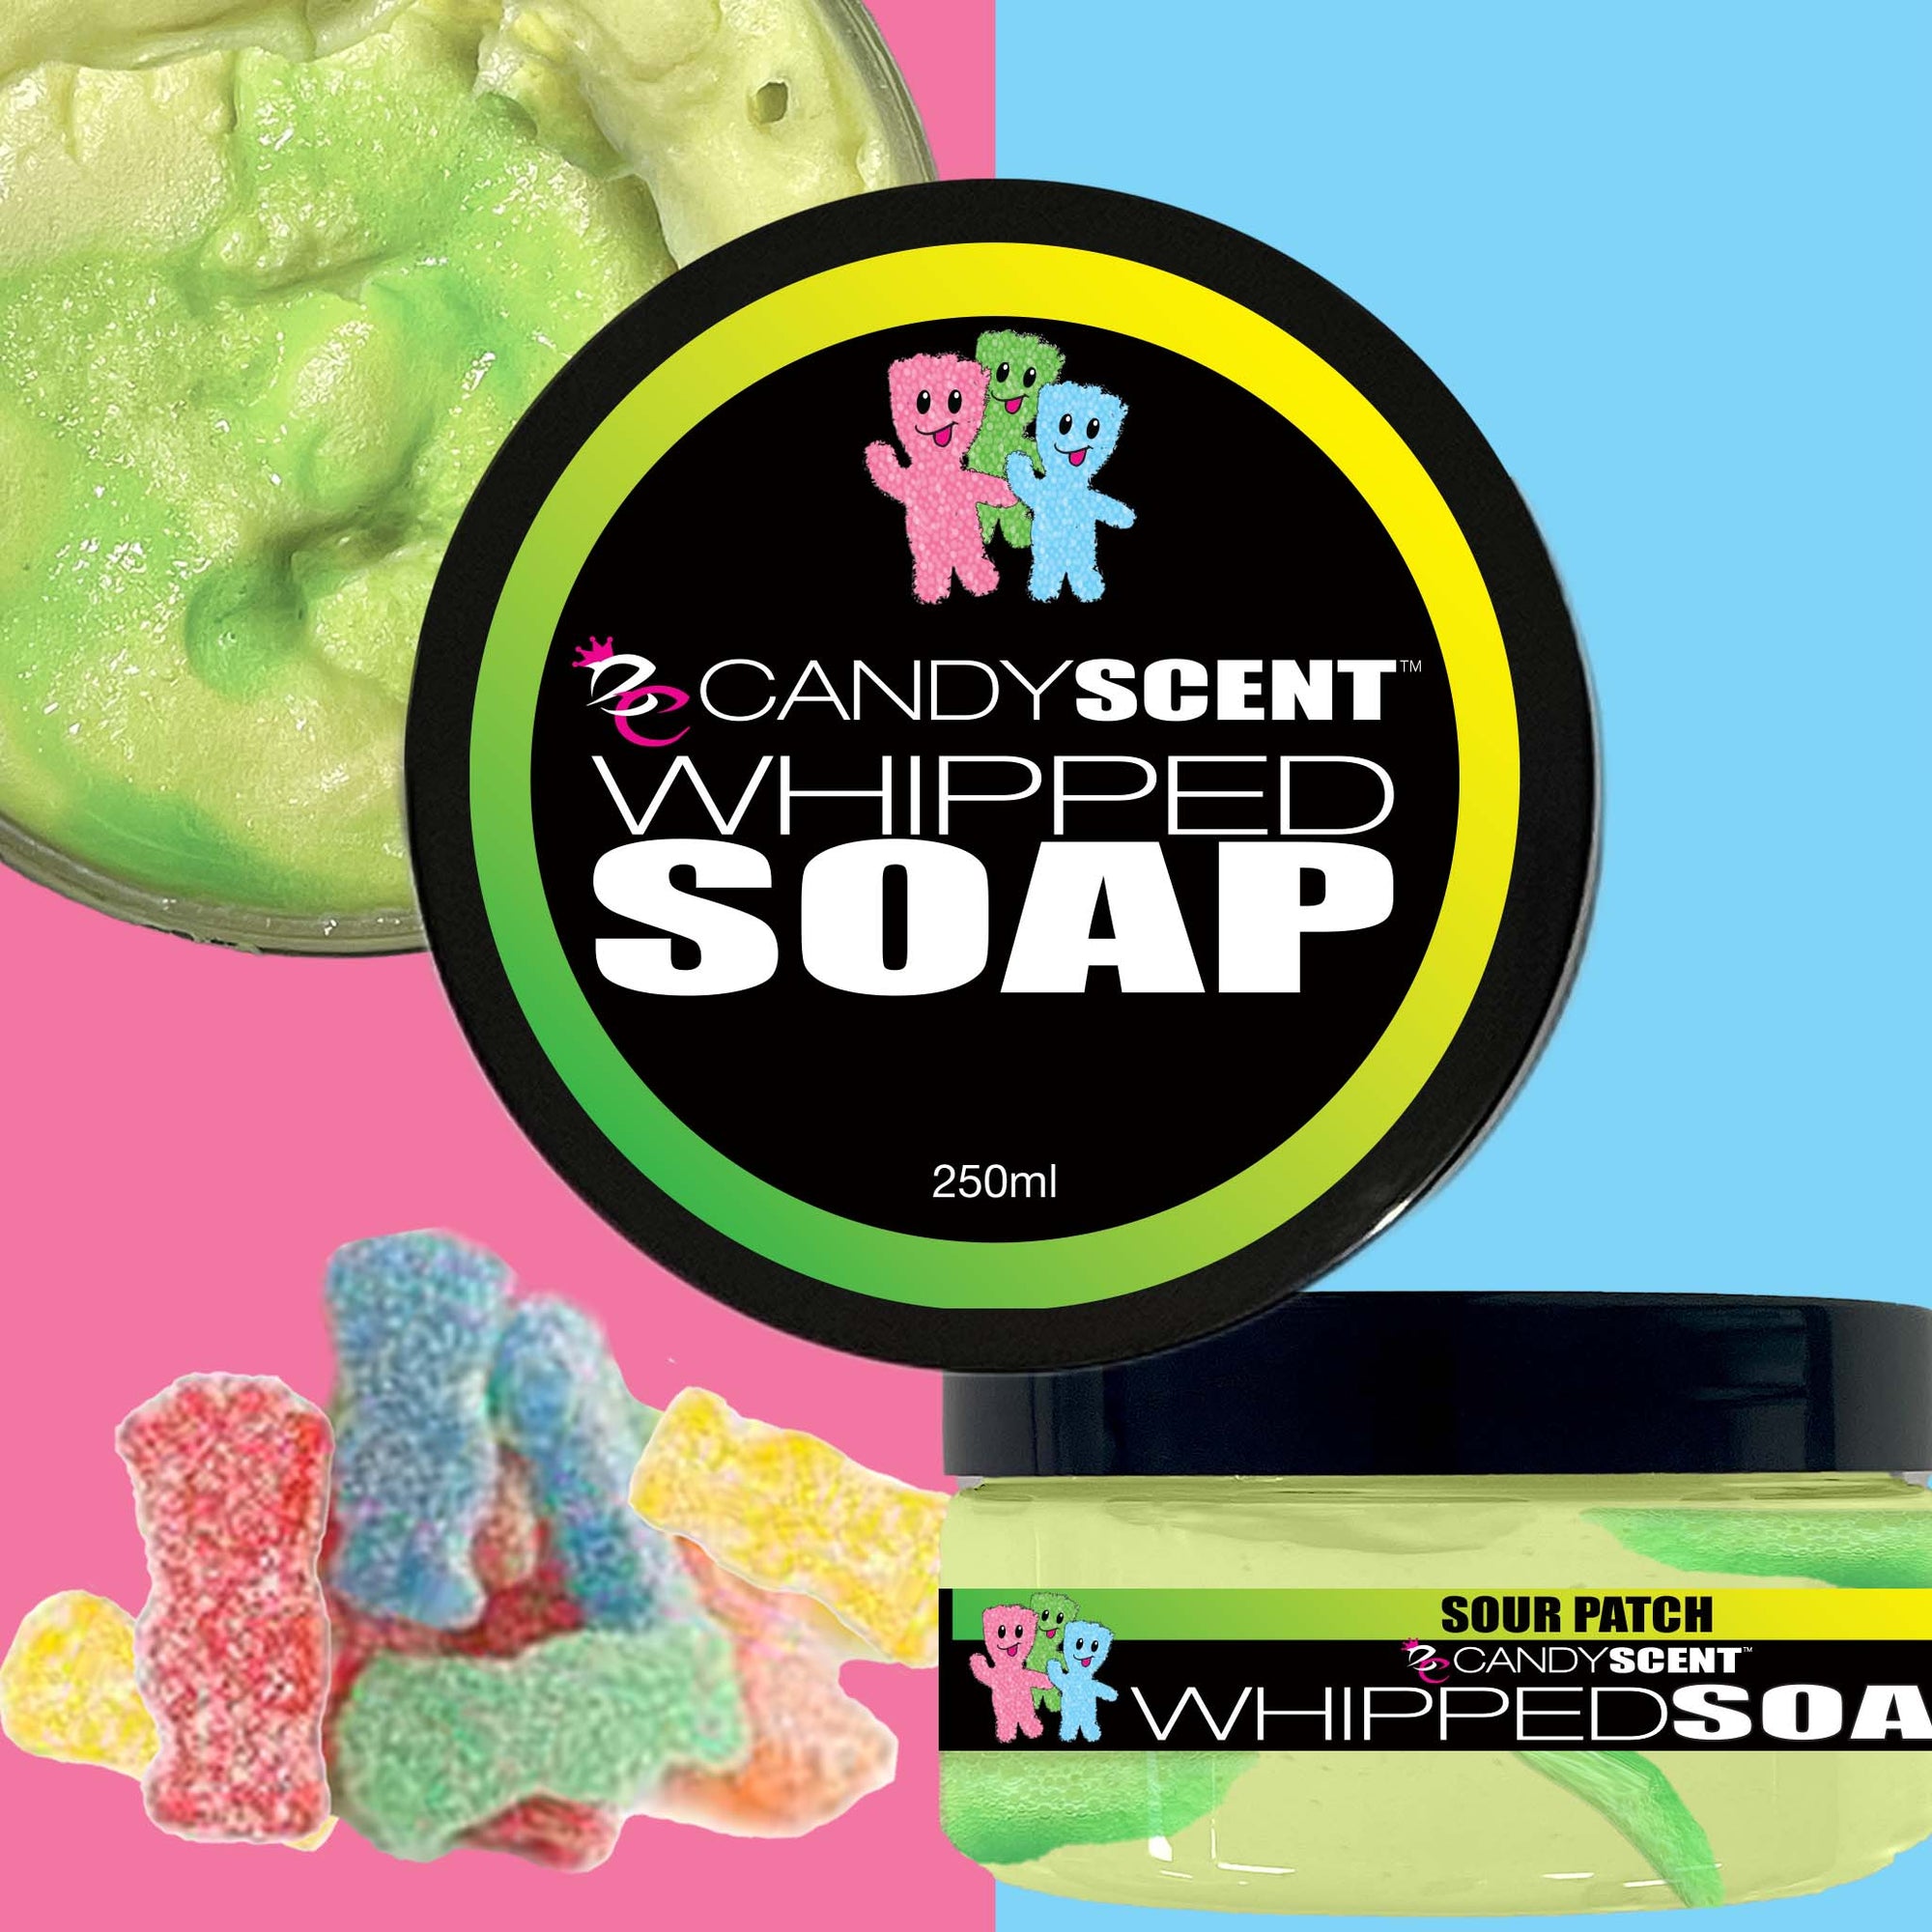 SOUR PATCH Whipped Soap